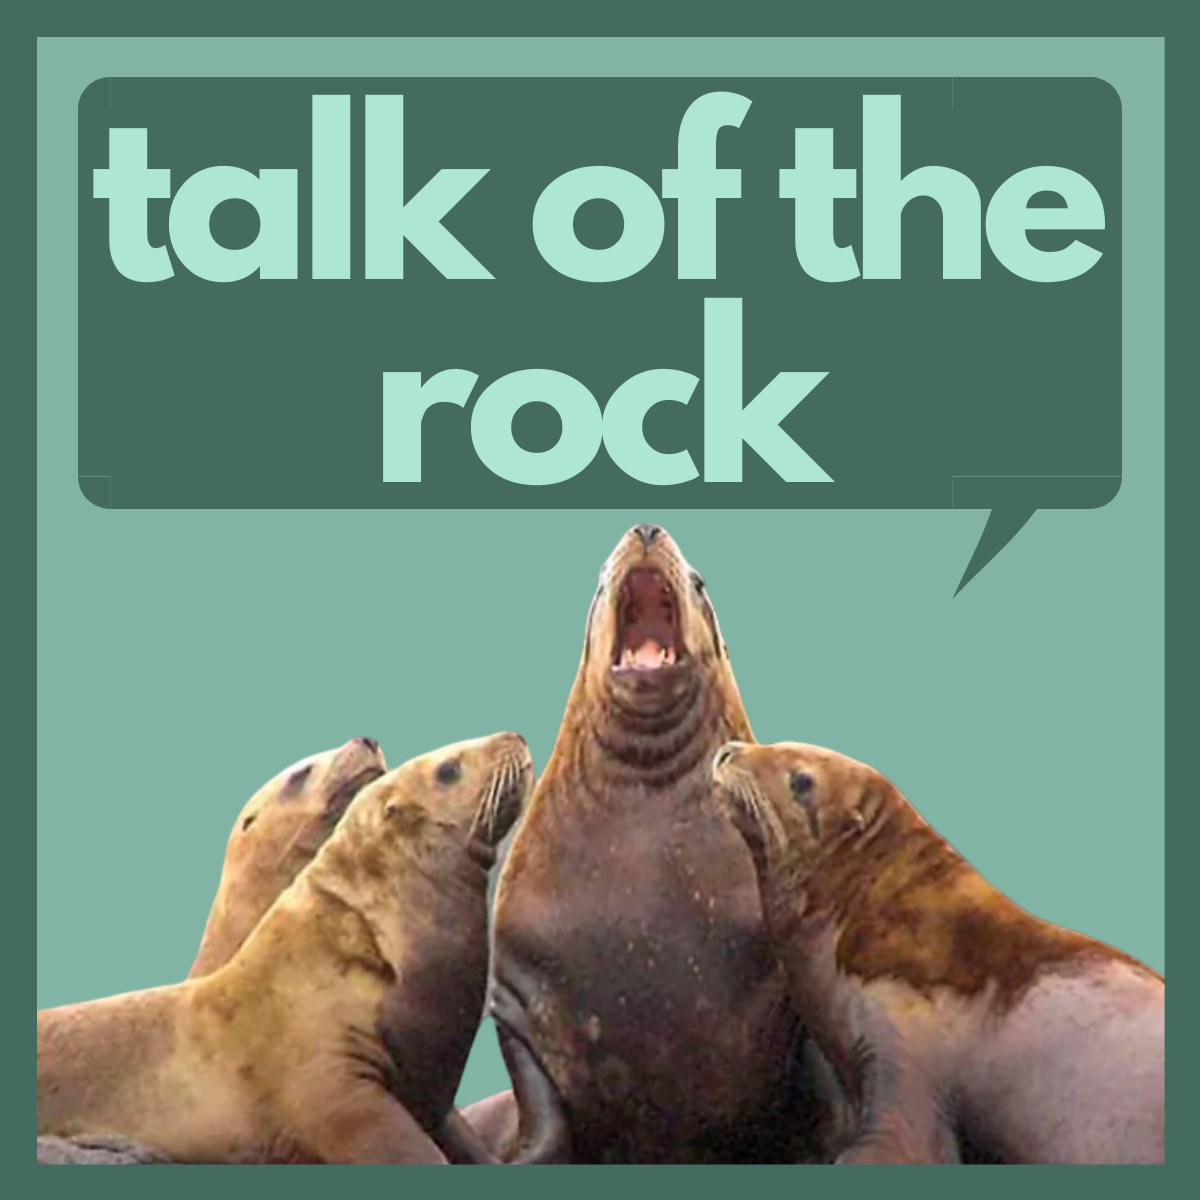 Kodiak Youth Sexual Health Initiative: Talking about the Rock